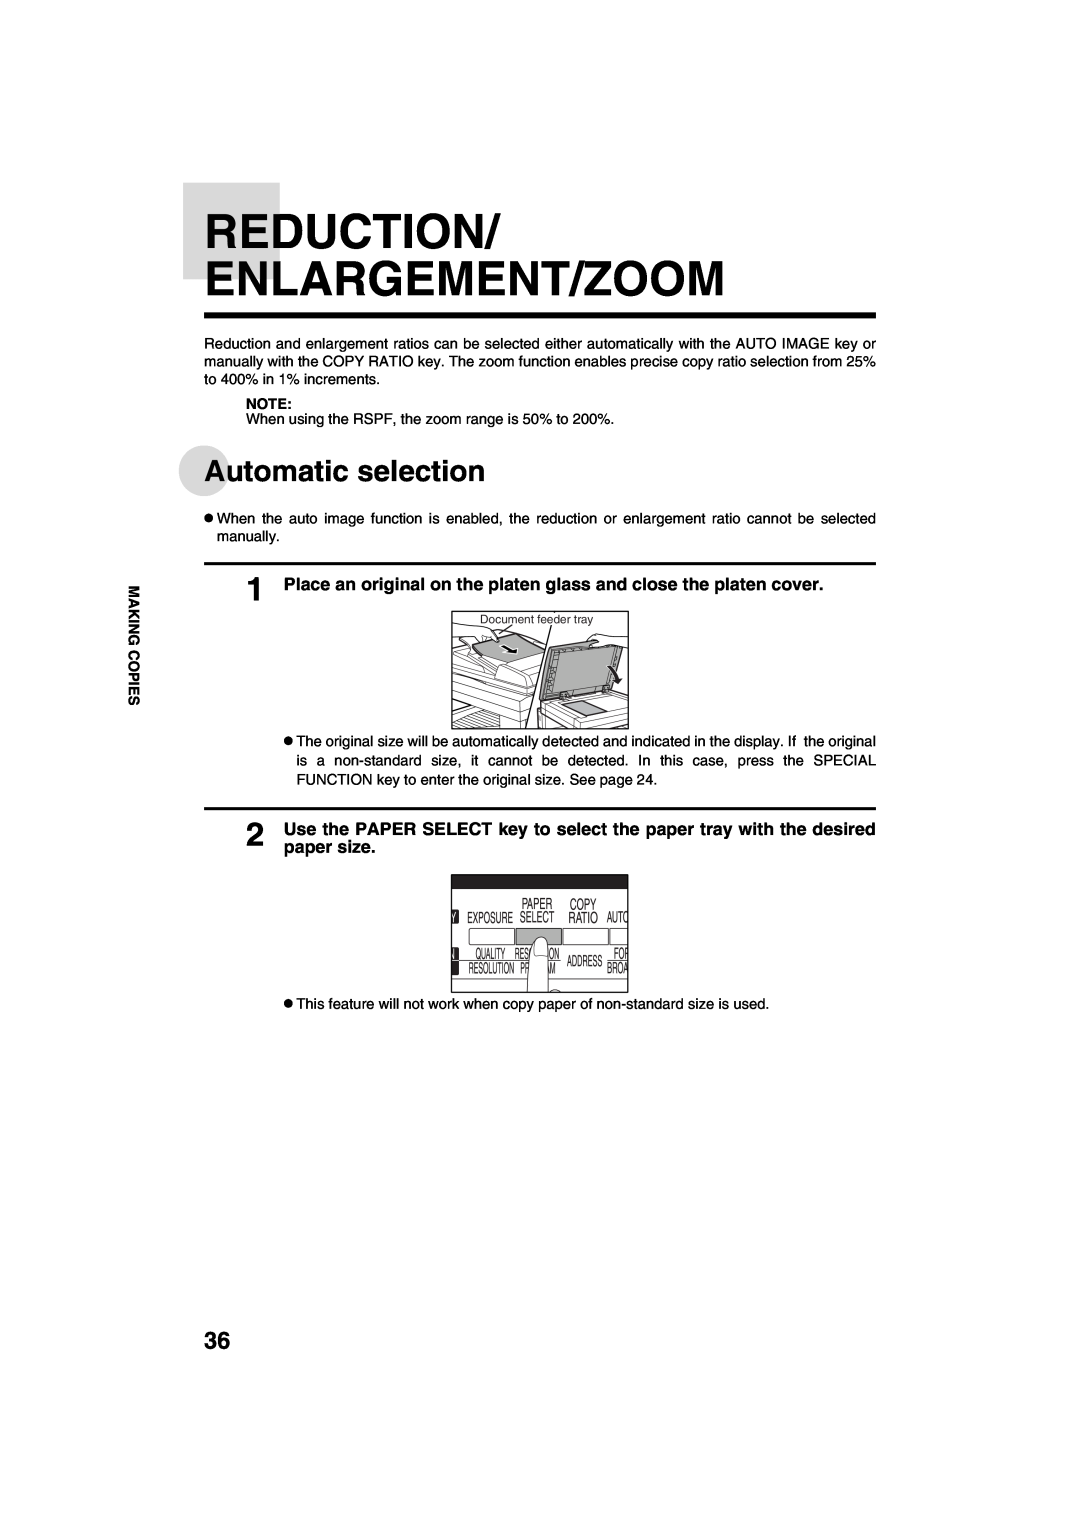 Sharp AR-M208 operation manual Reduction Enlargement/Zoom, Automatic selection, paper size 